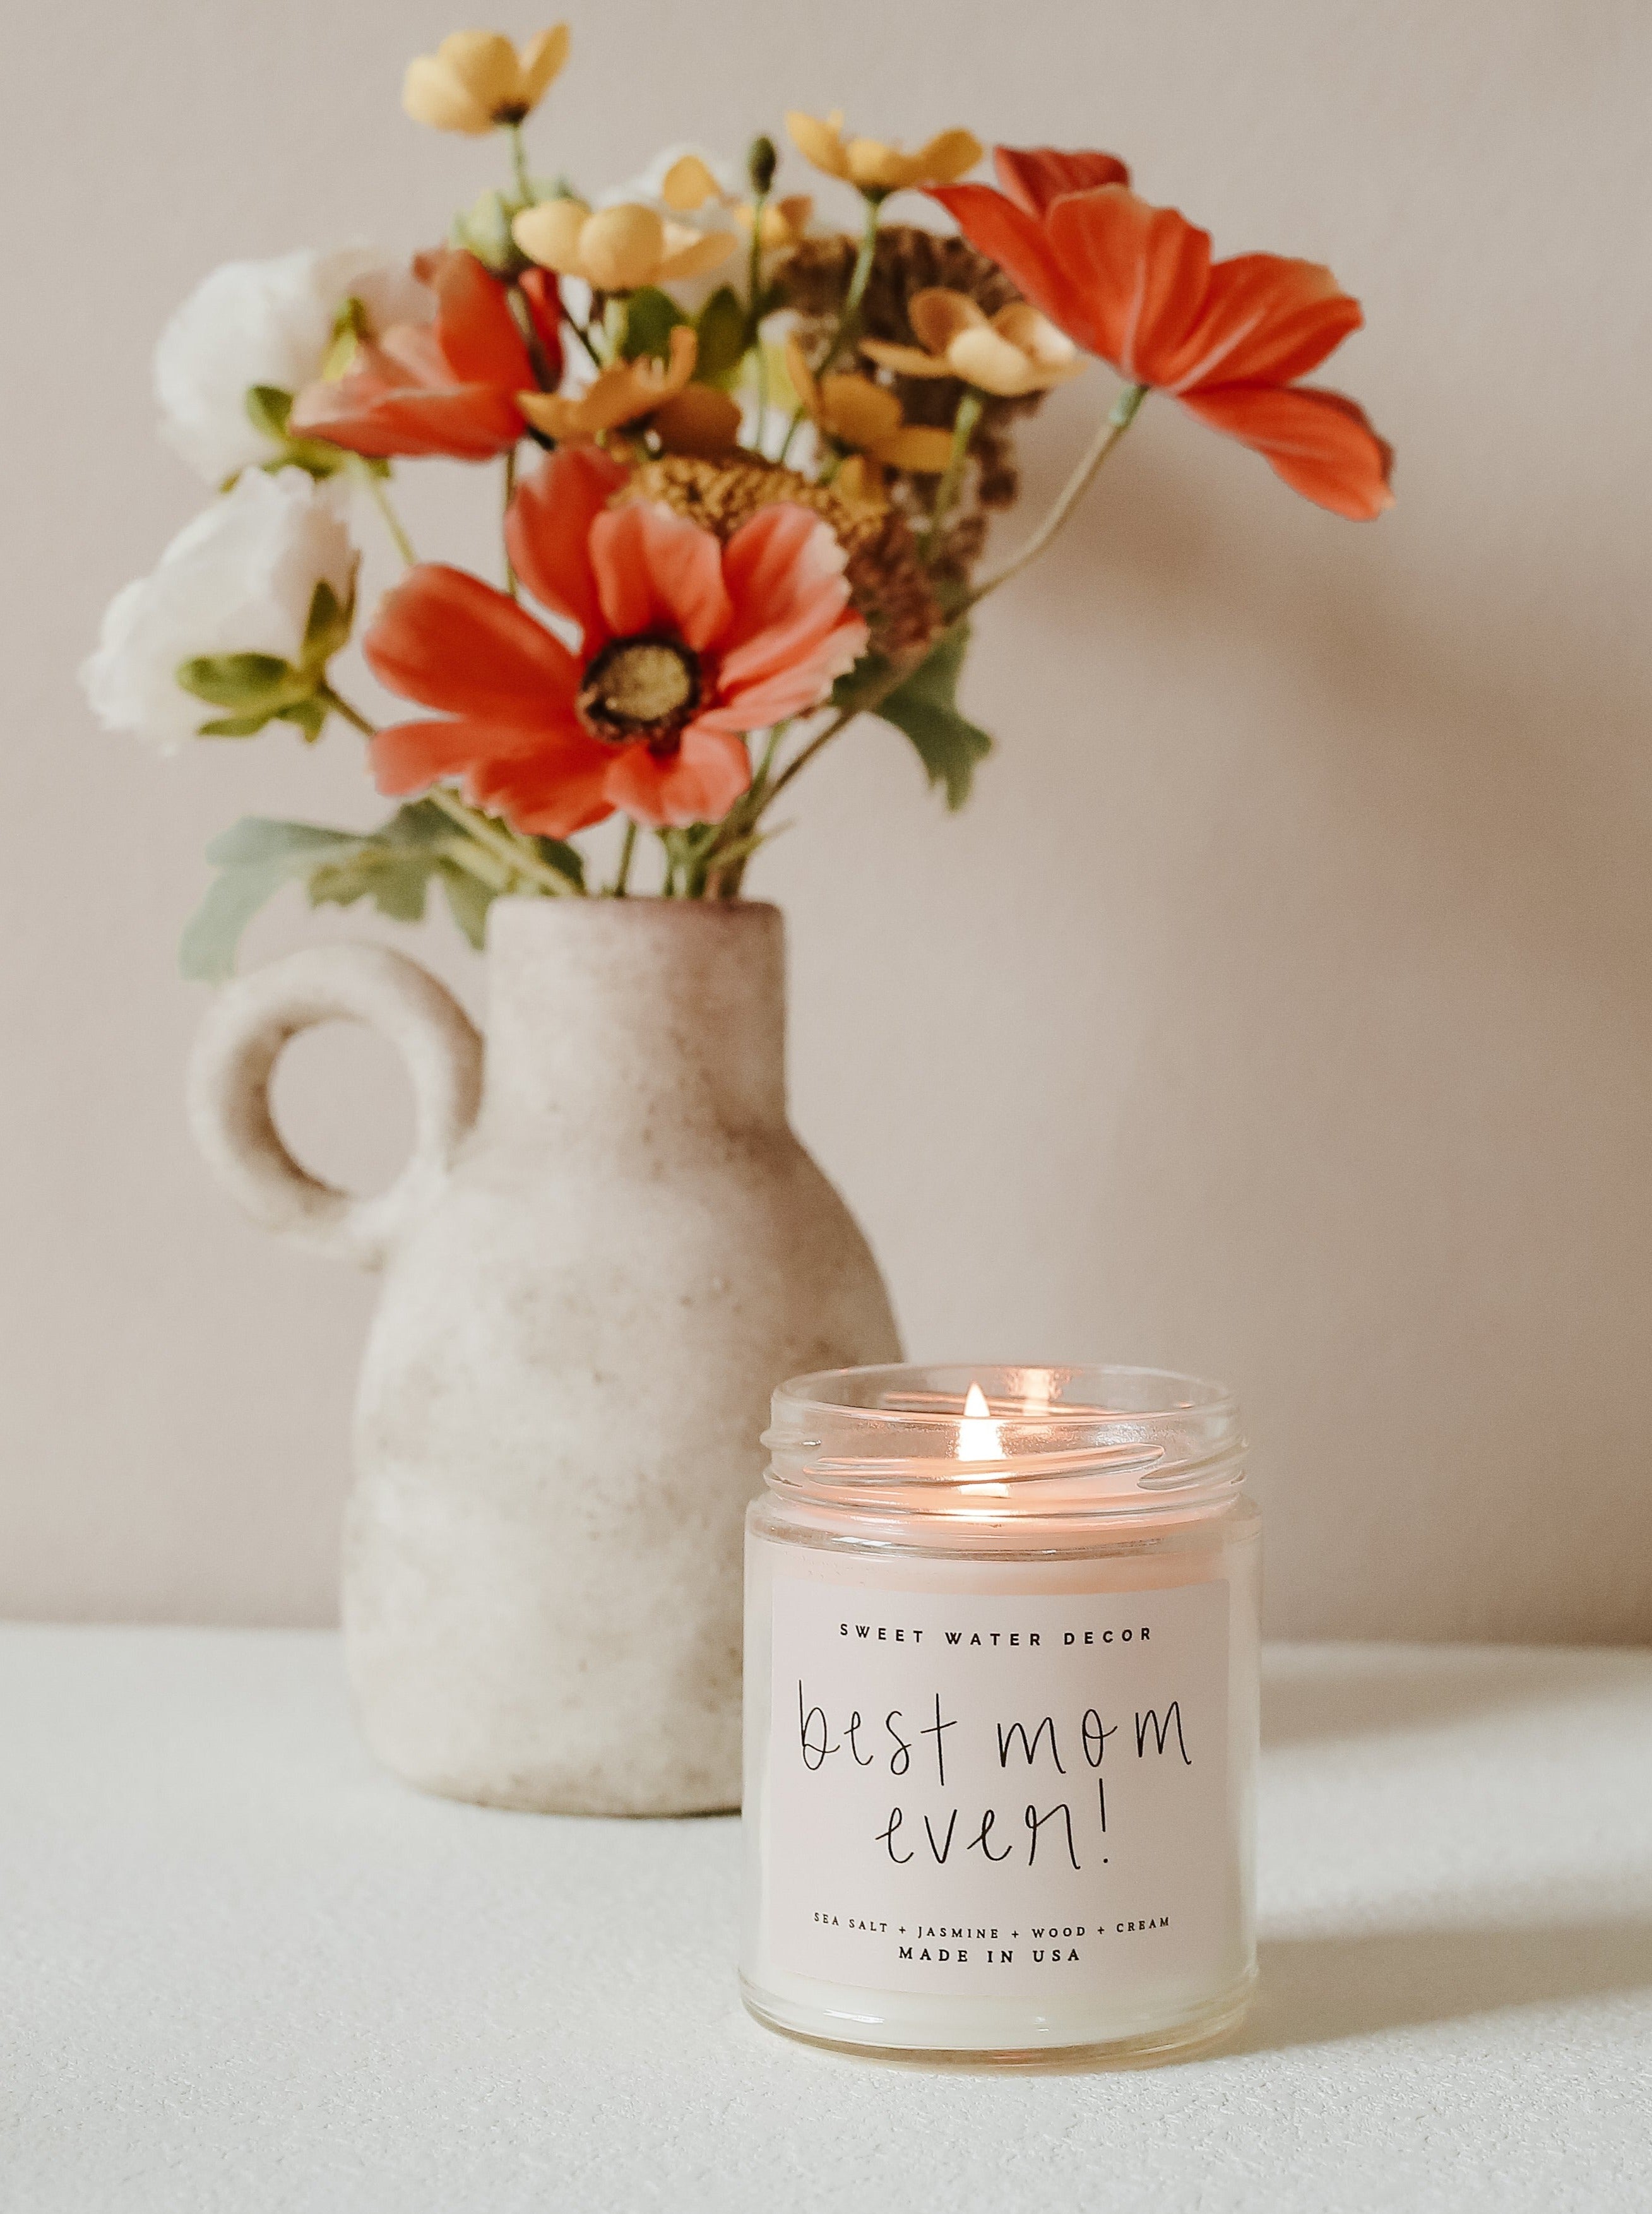 Best New Candles for Mother's Day